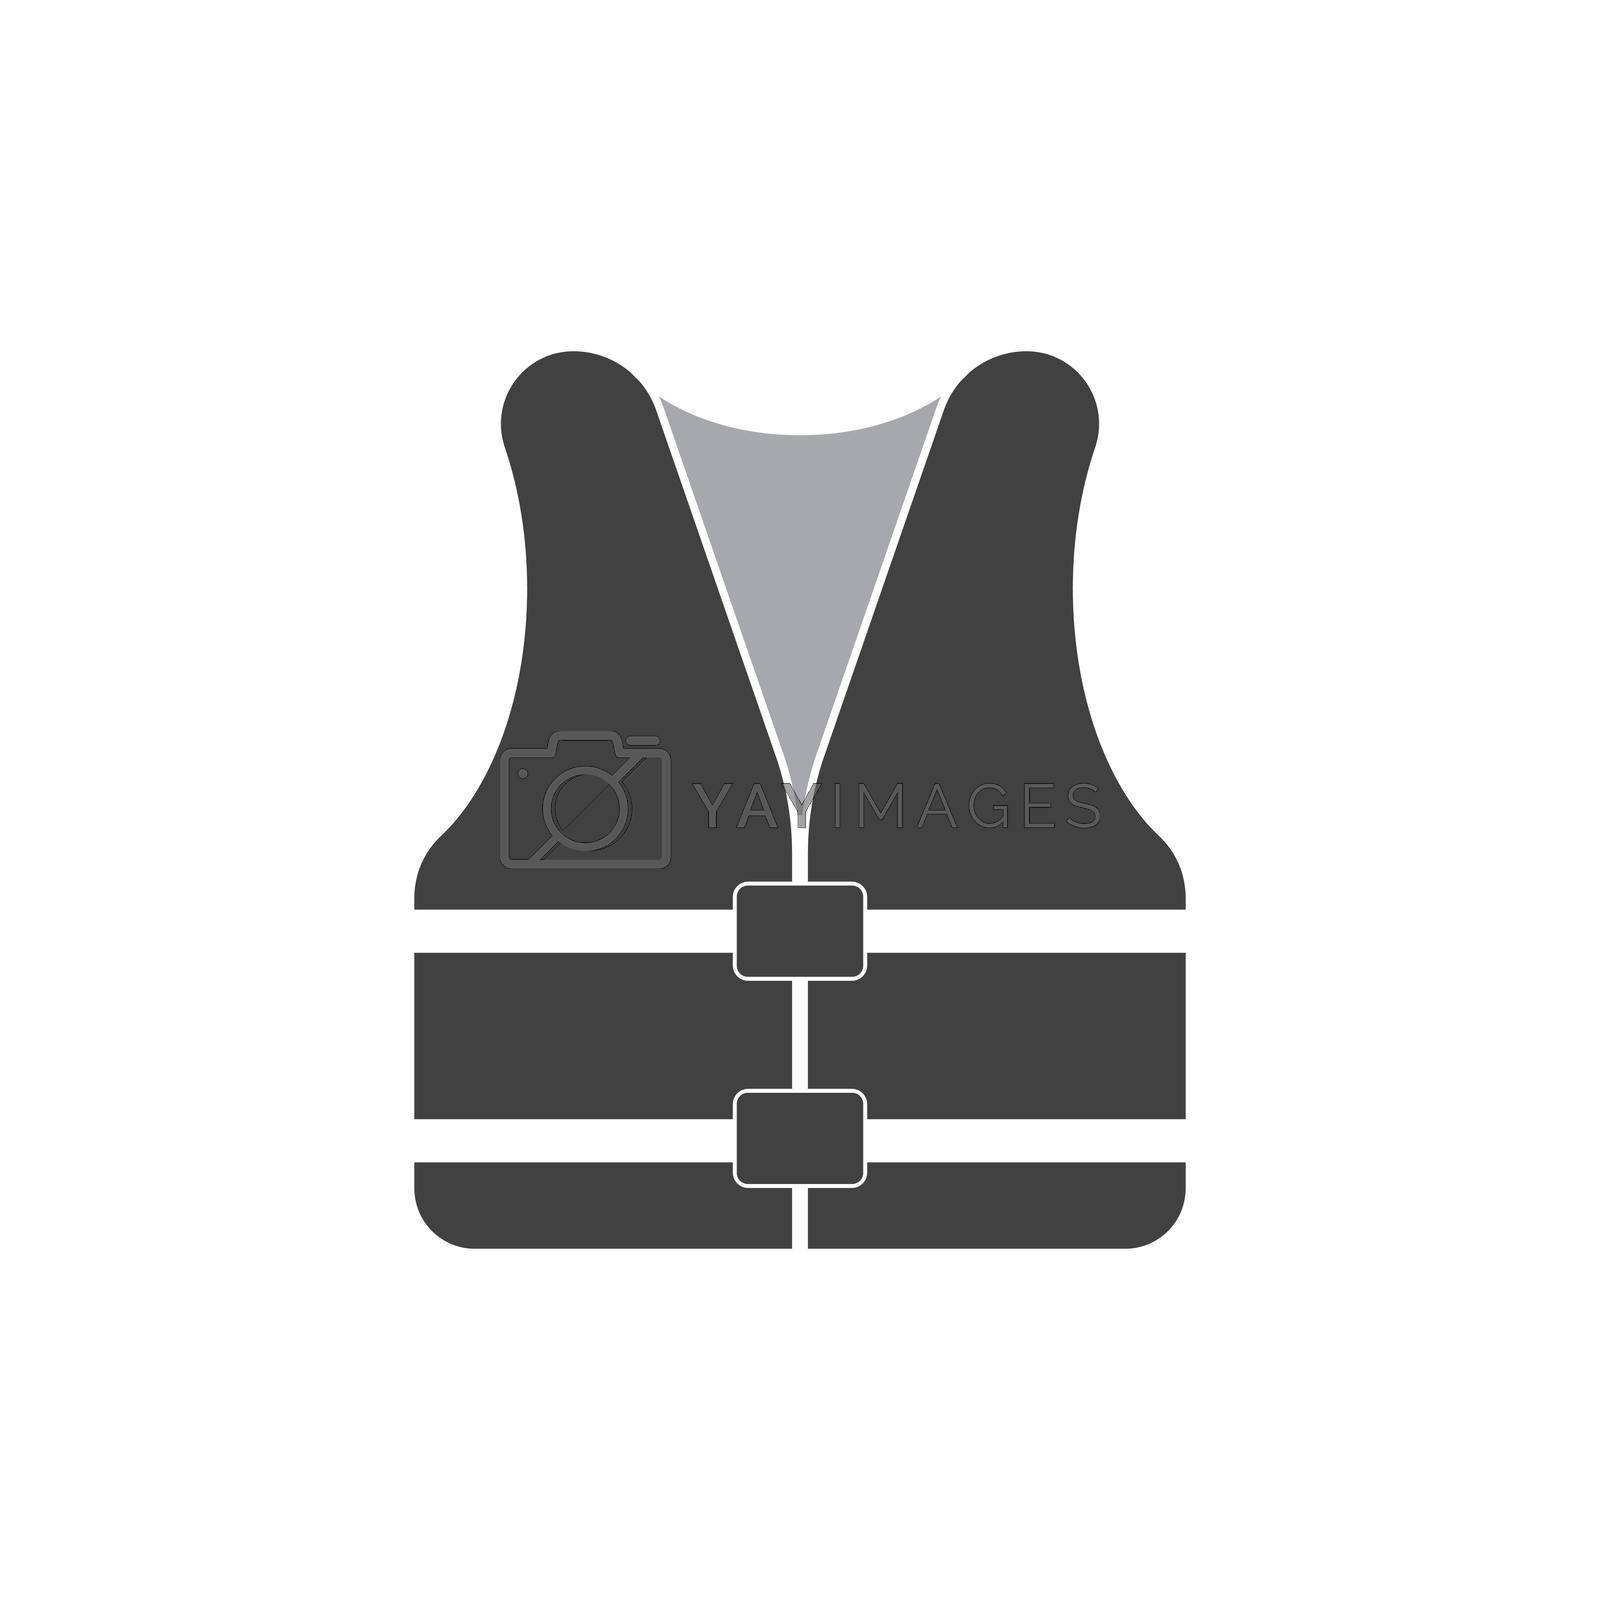 Royalty free image of Life vest icon logo by awk